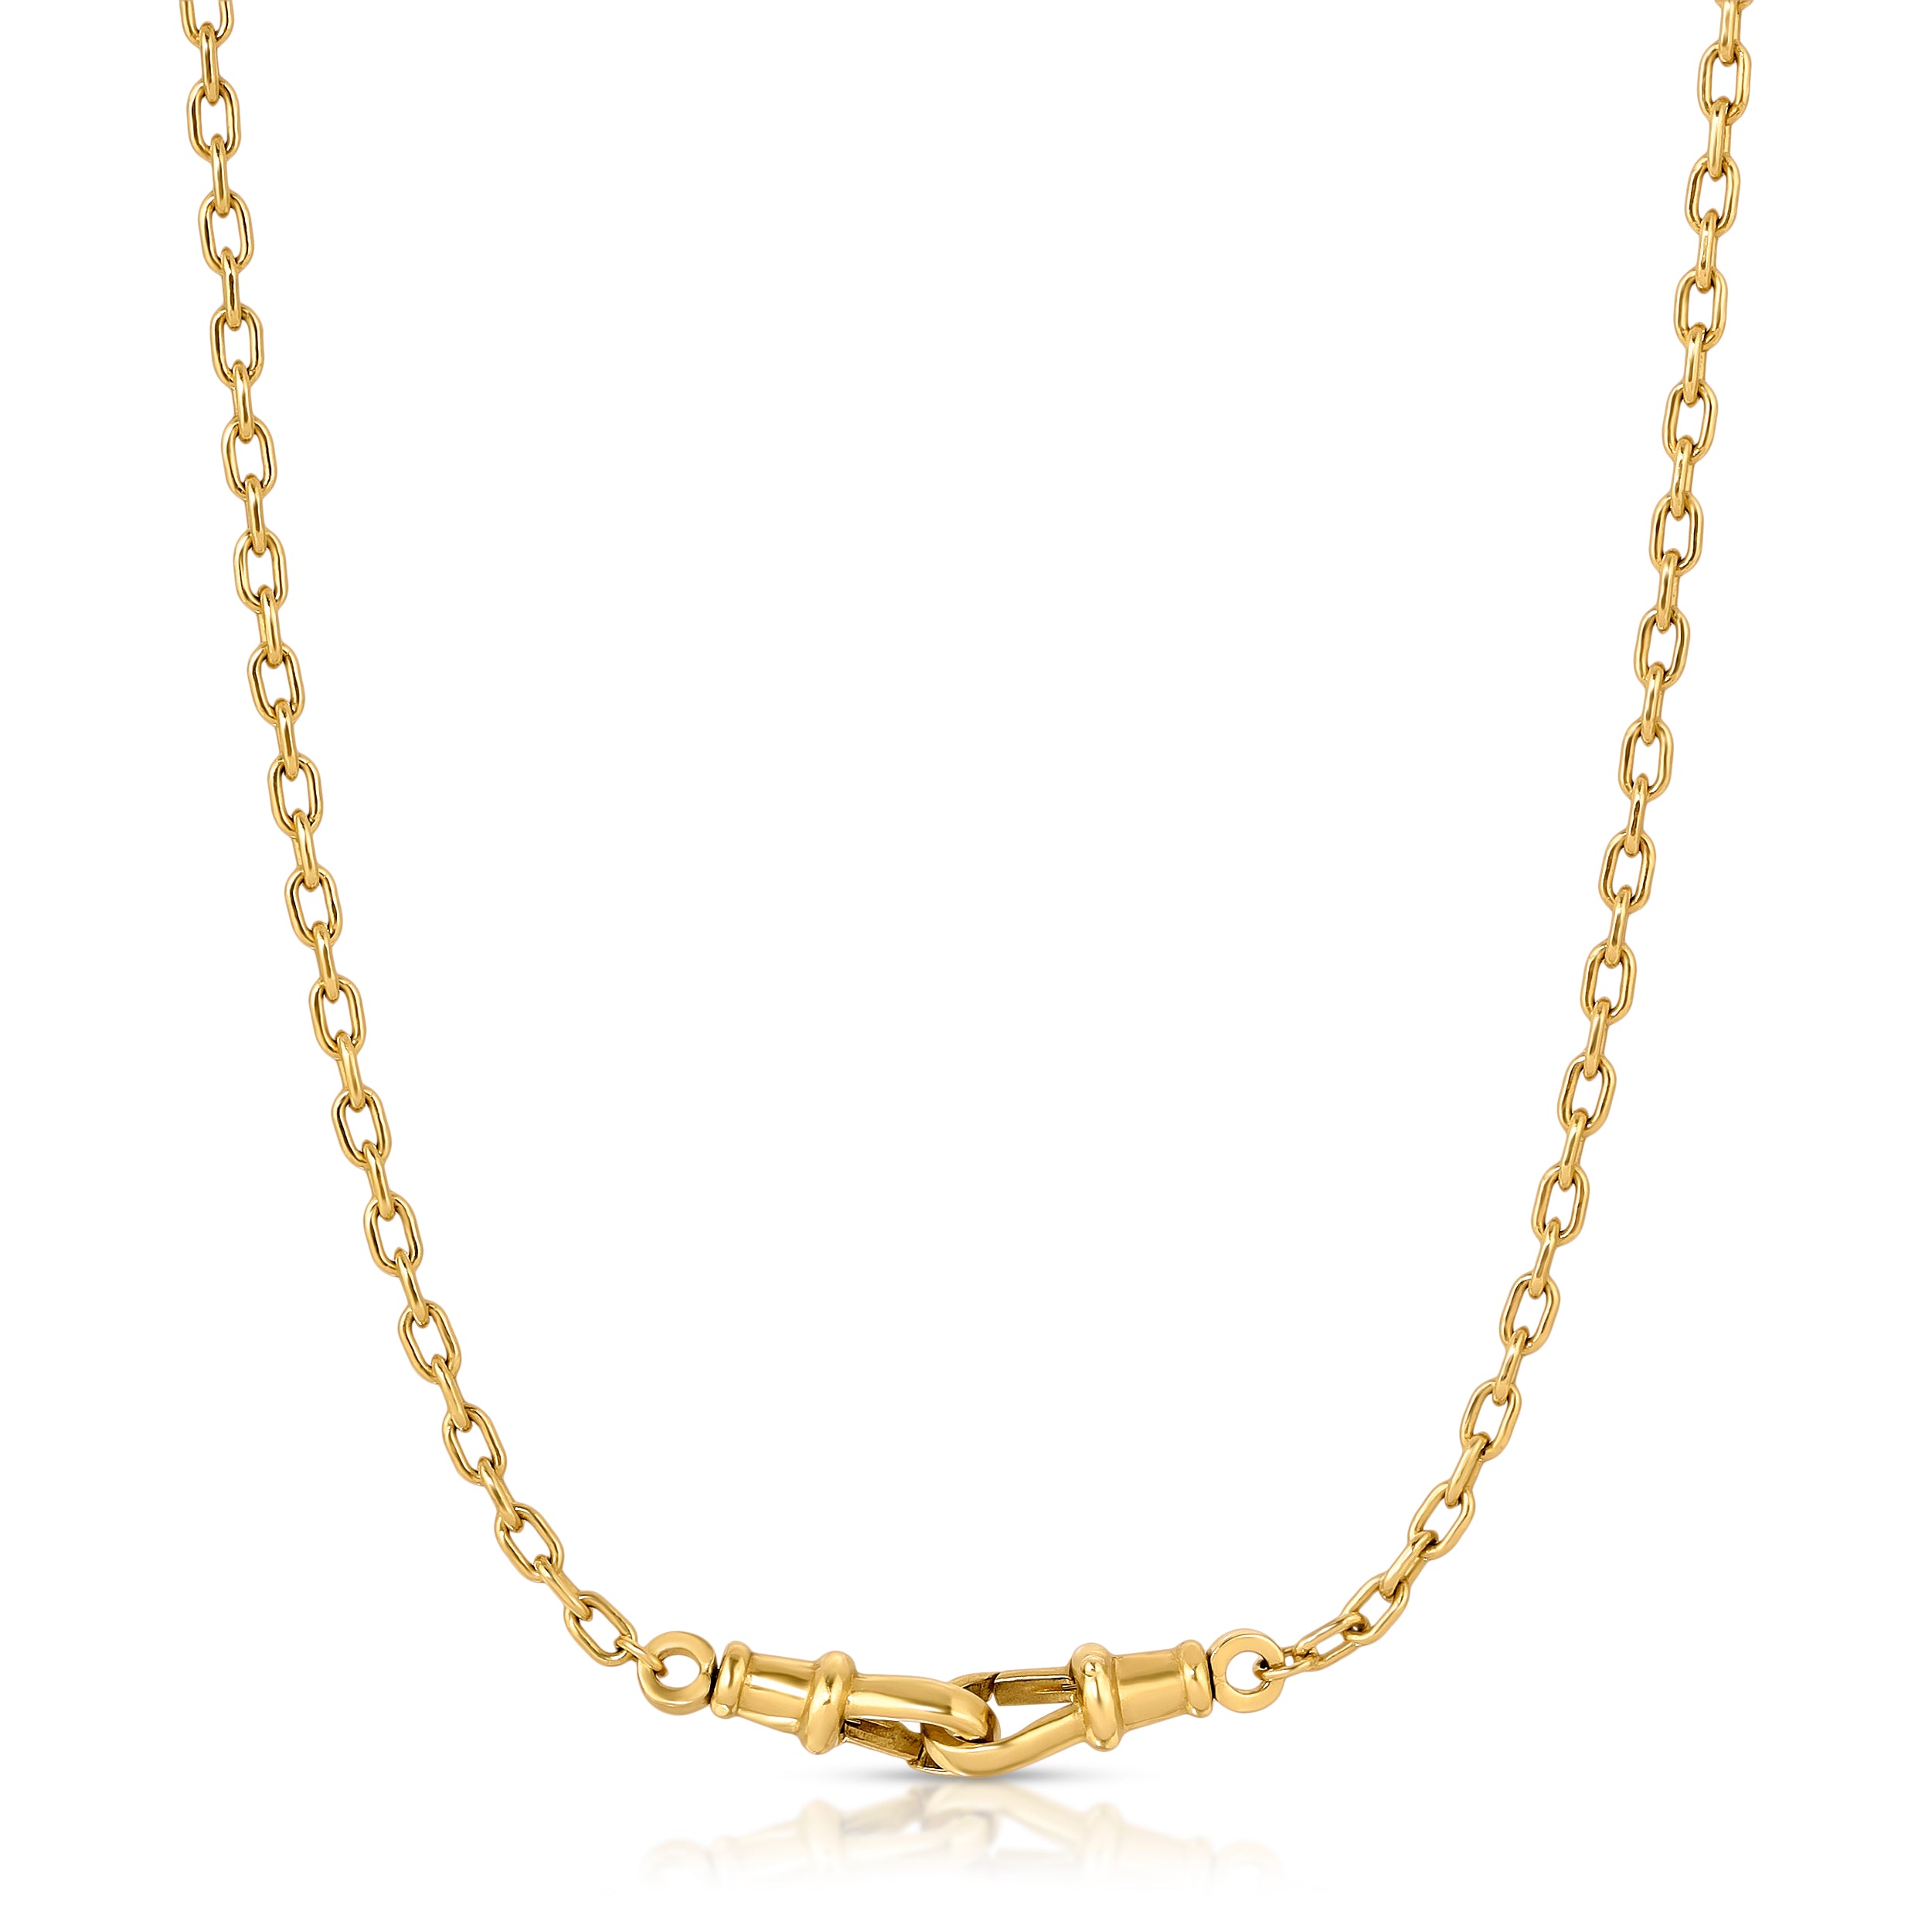 Buy Large Oval Link Chain Necklace 18K Gold Online at Irene Neuwirth